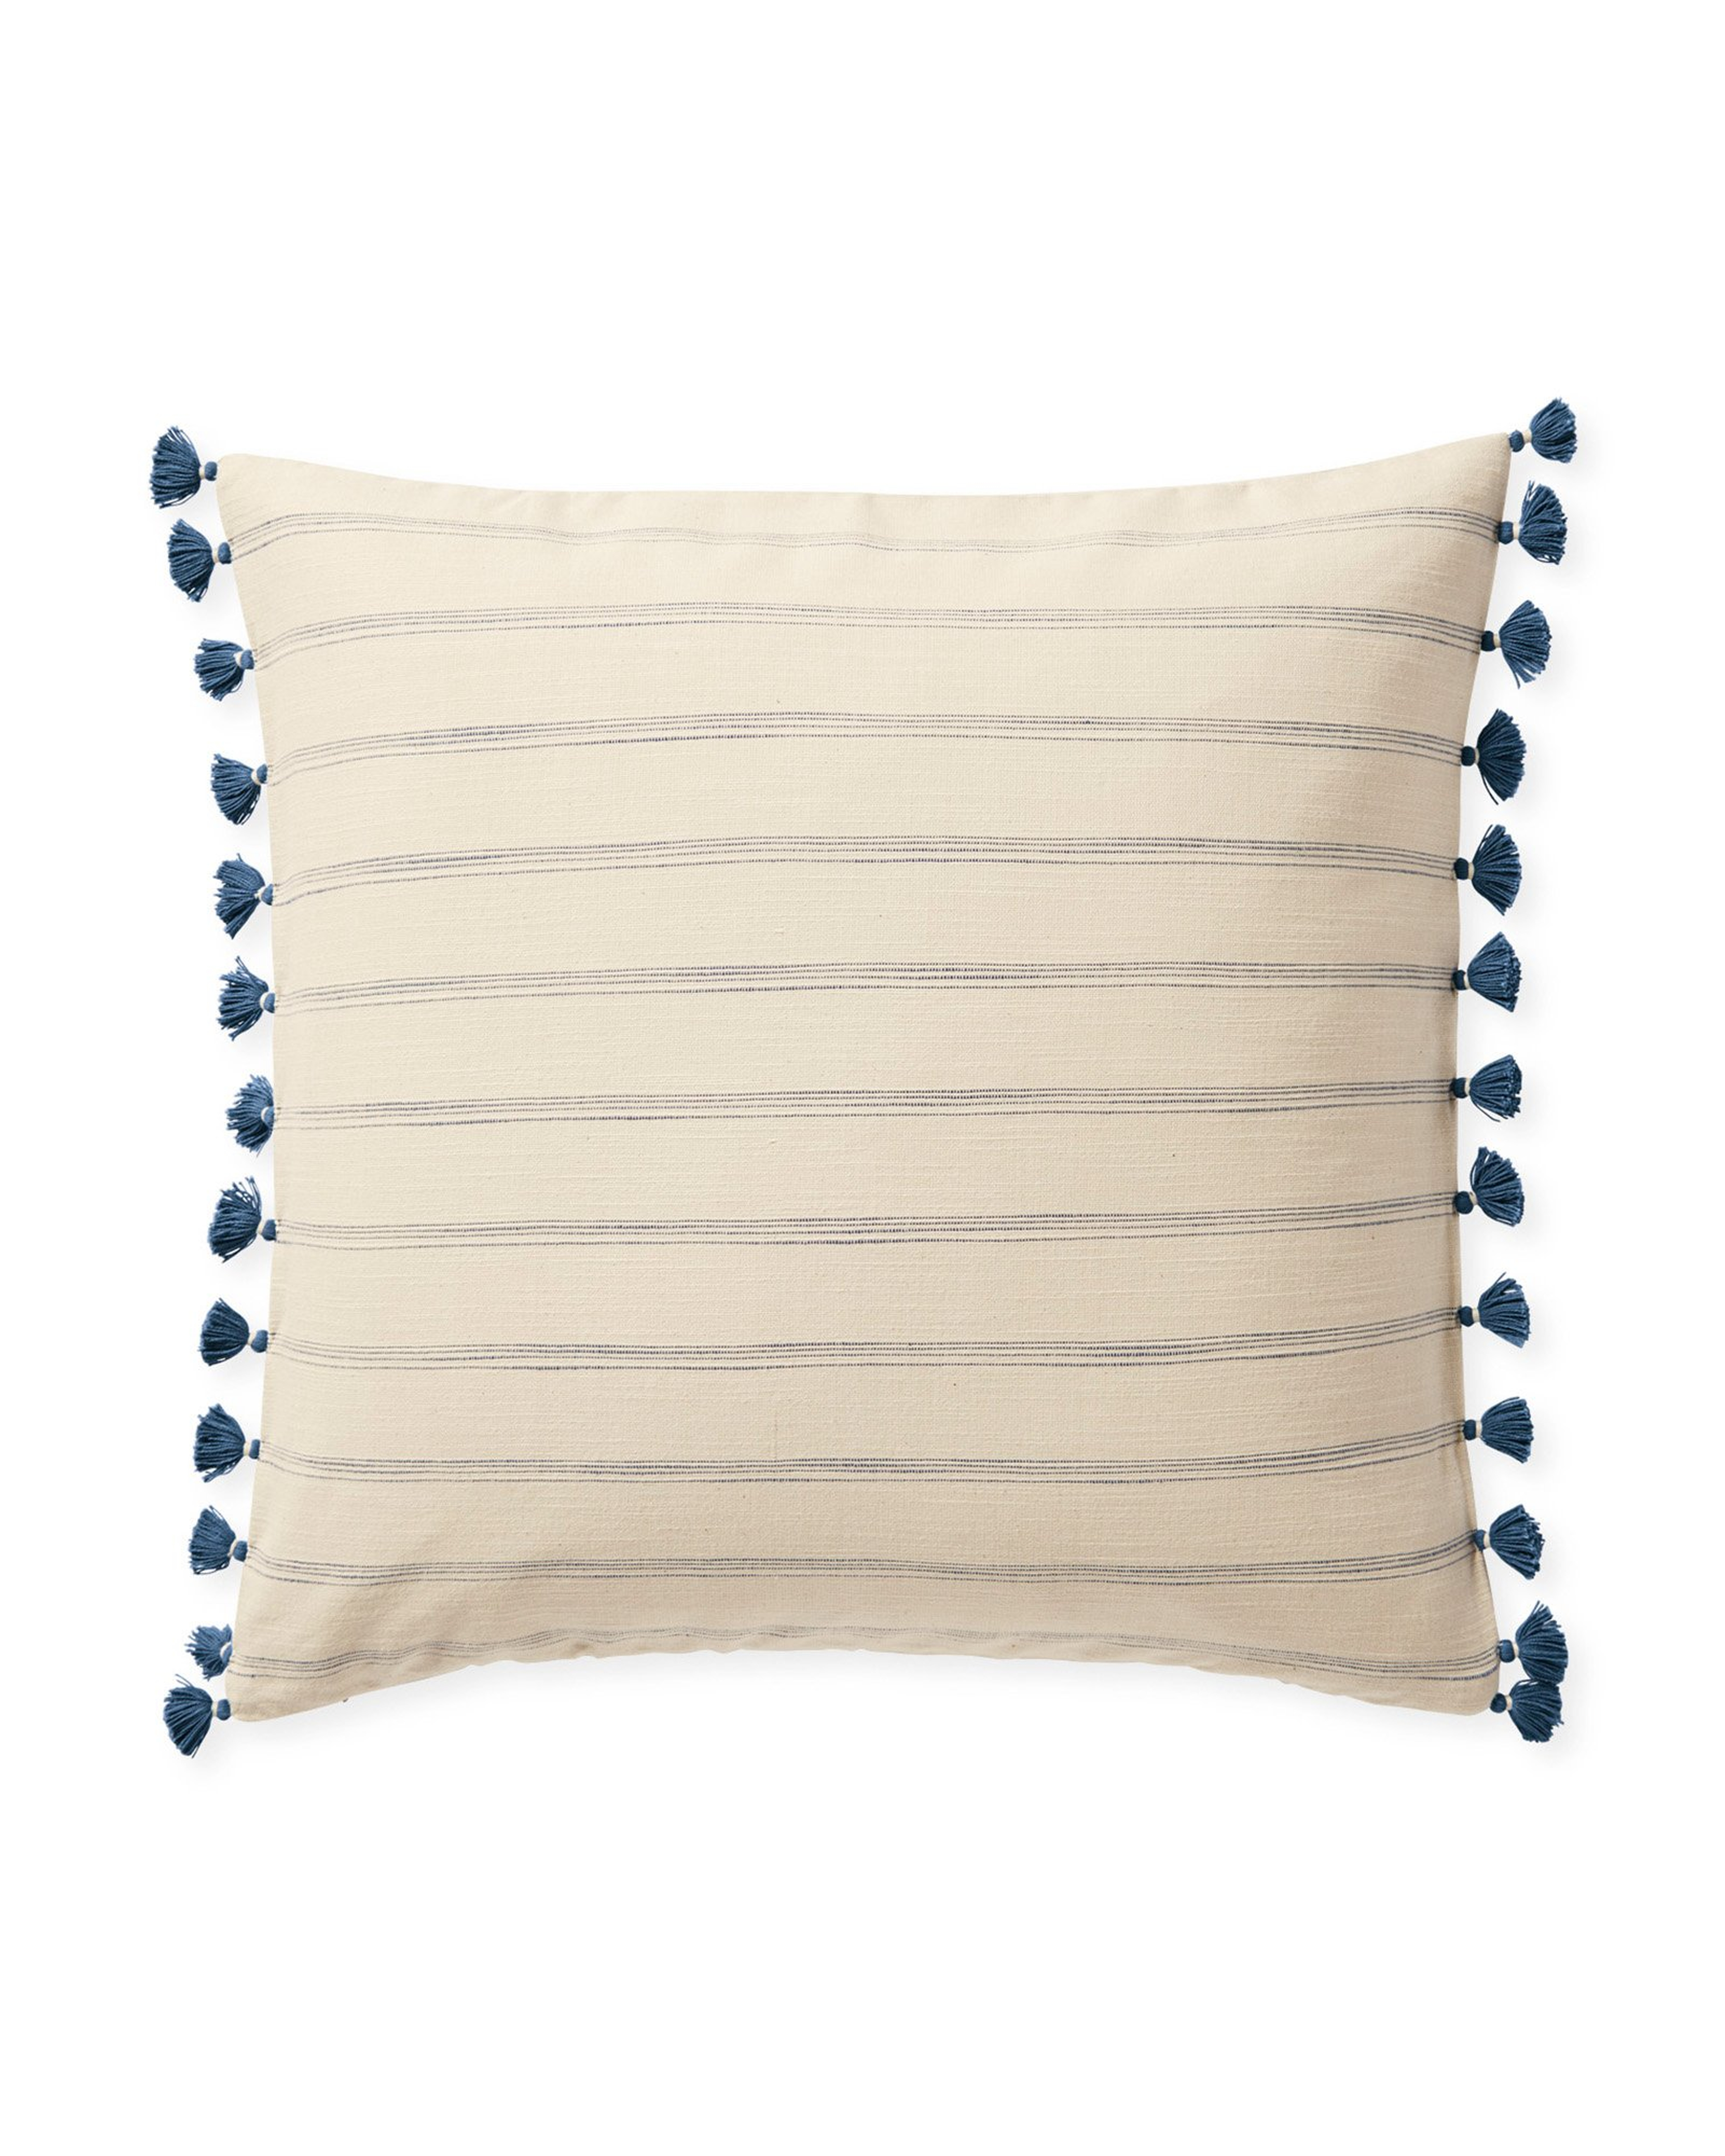 Alsworth Pillow Cover - Washed Indigo - Serena and Lily